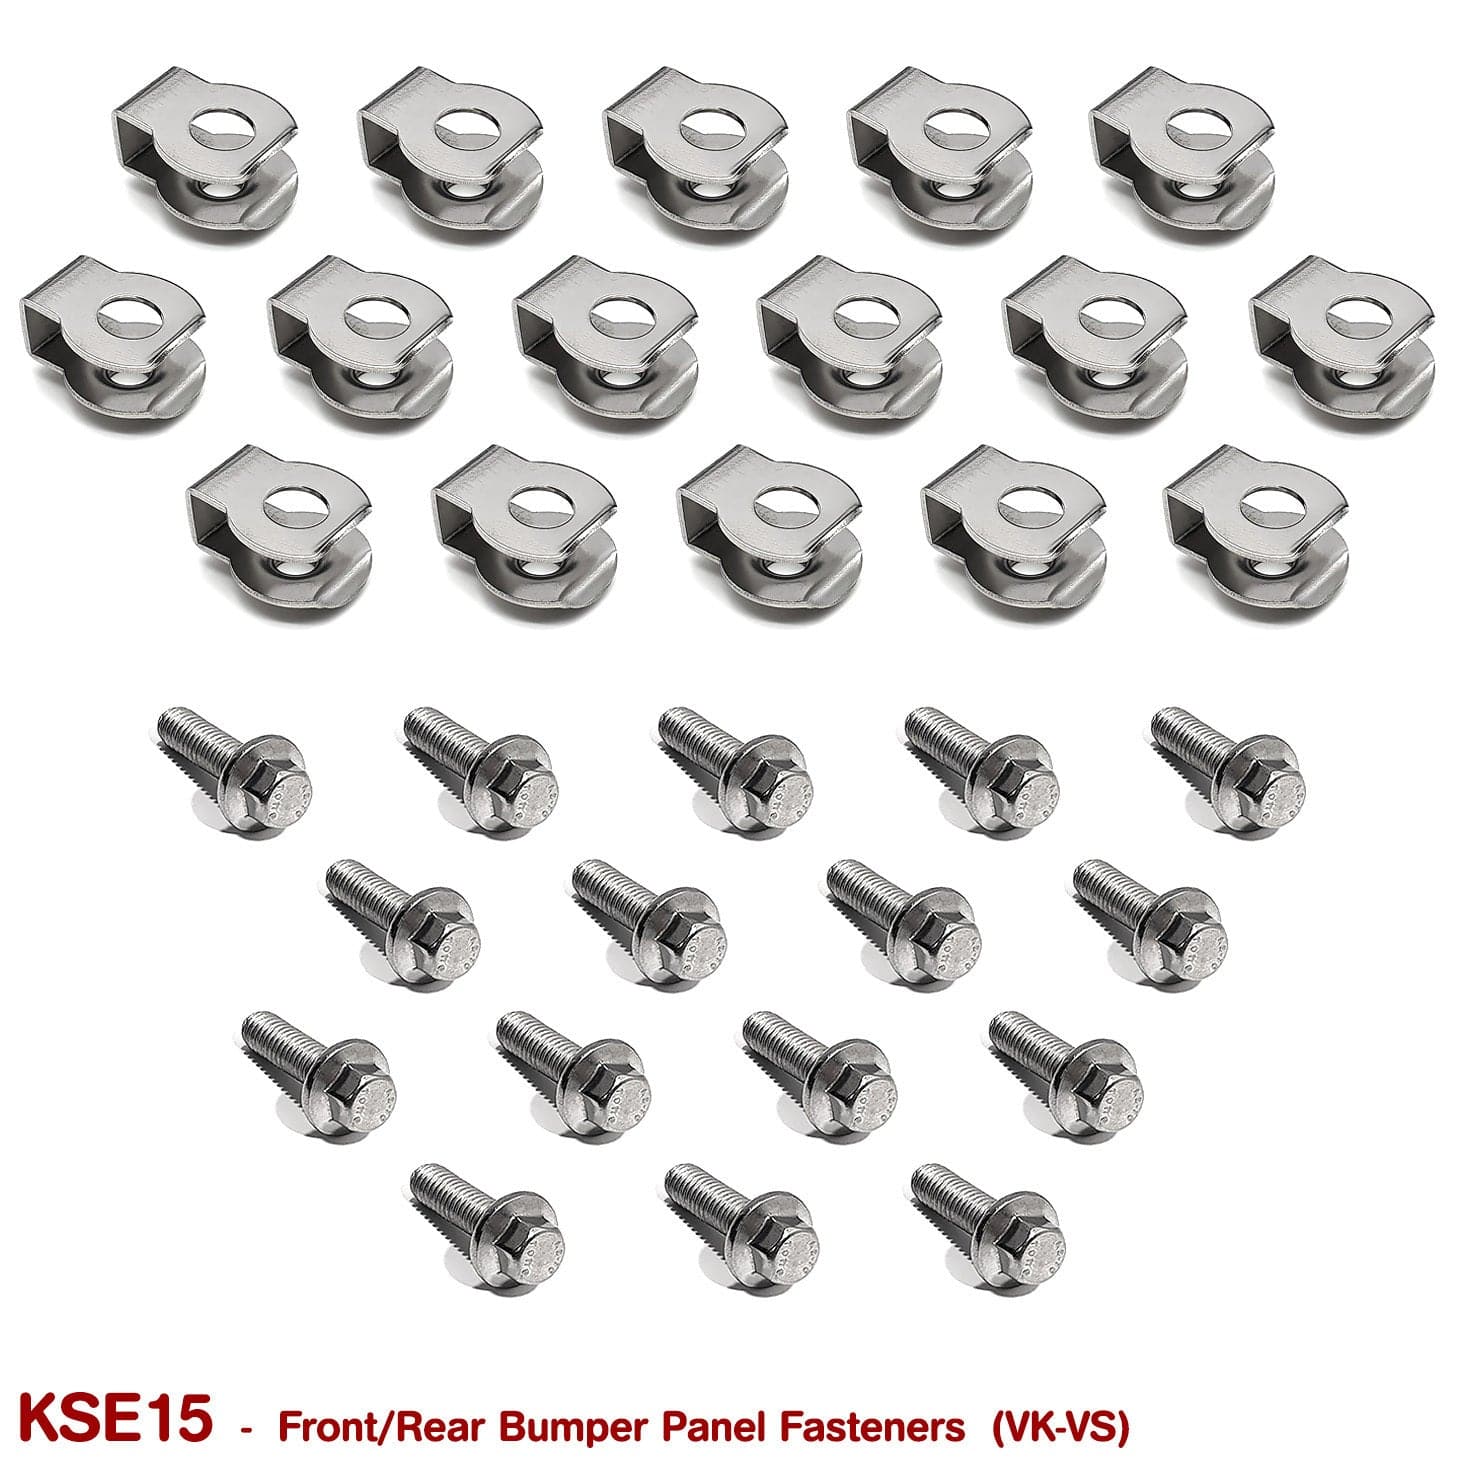 BUMPER PANEL CLIPS and BOLTS for VK-VS